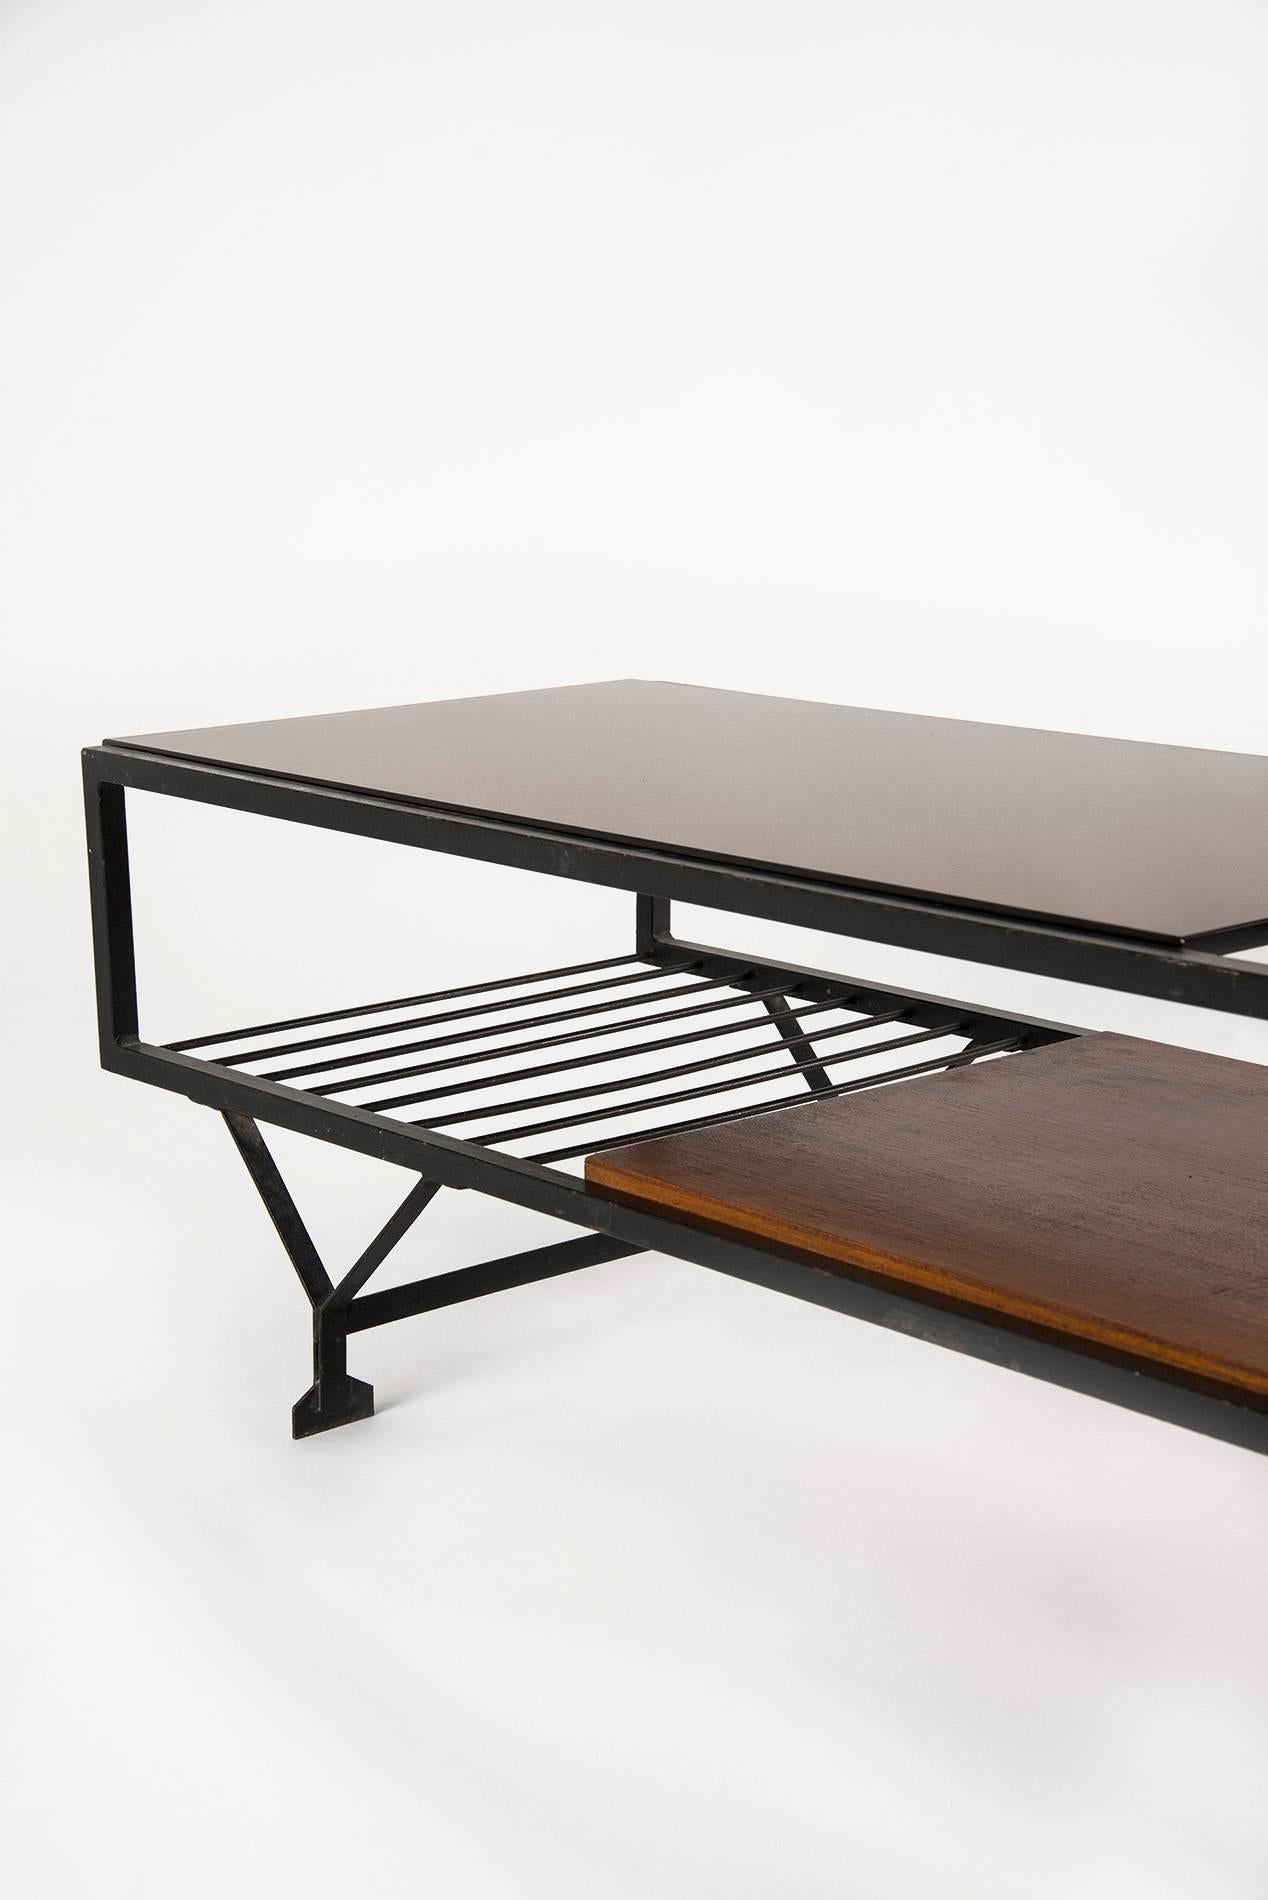 Lacquered Large Low Table, Italy, 1950s